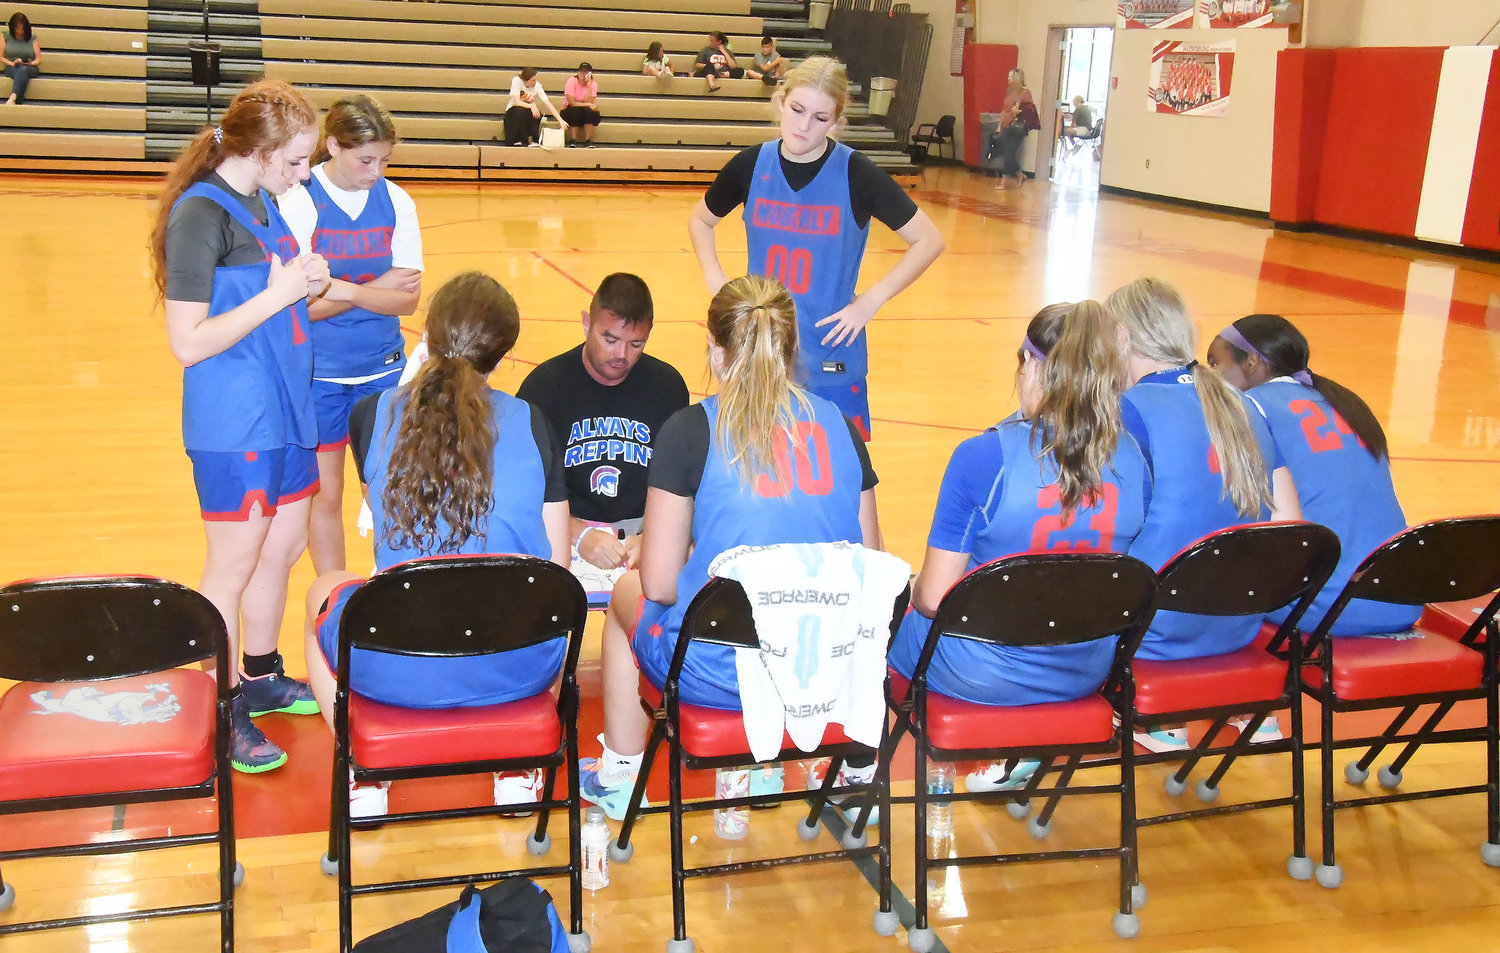 Moberly head girls' basketball coach Tony Vestal talks to his team during a timeout while Haley Baker, Elizabeth Reisenauer and Katelyn Bailey look on.